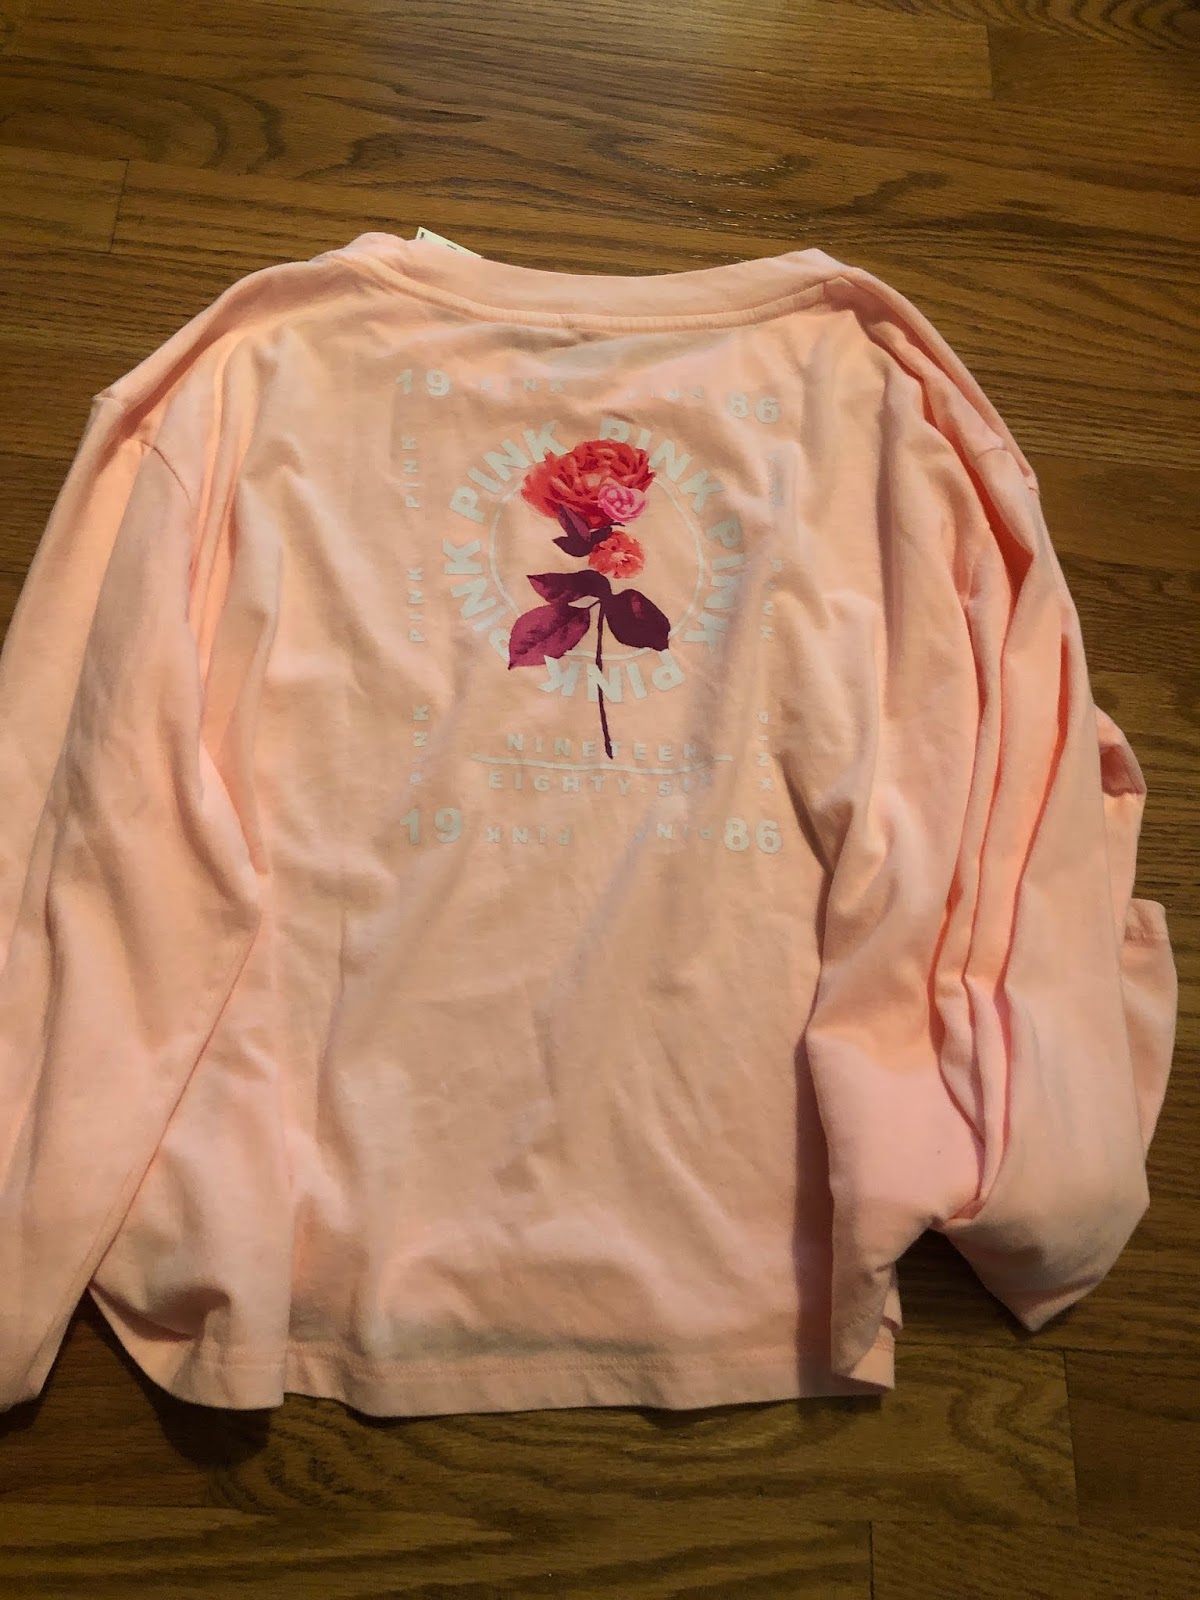 Fashion on a Dime: Brand New PINK Clothes at Thrift Store Prices!